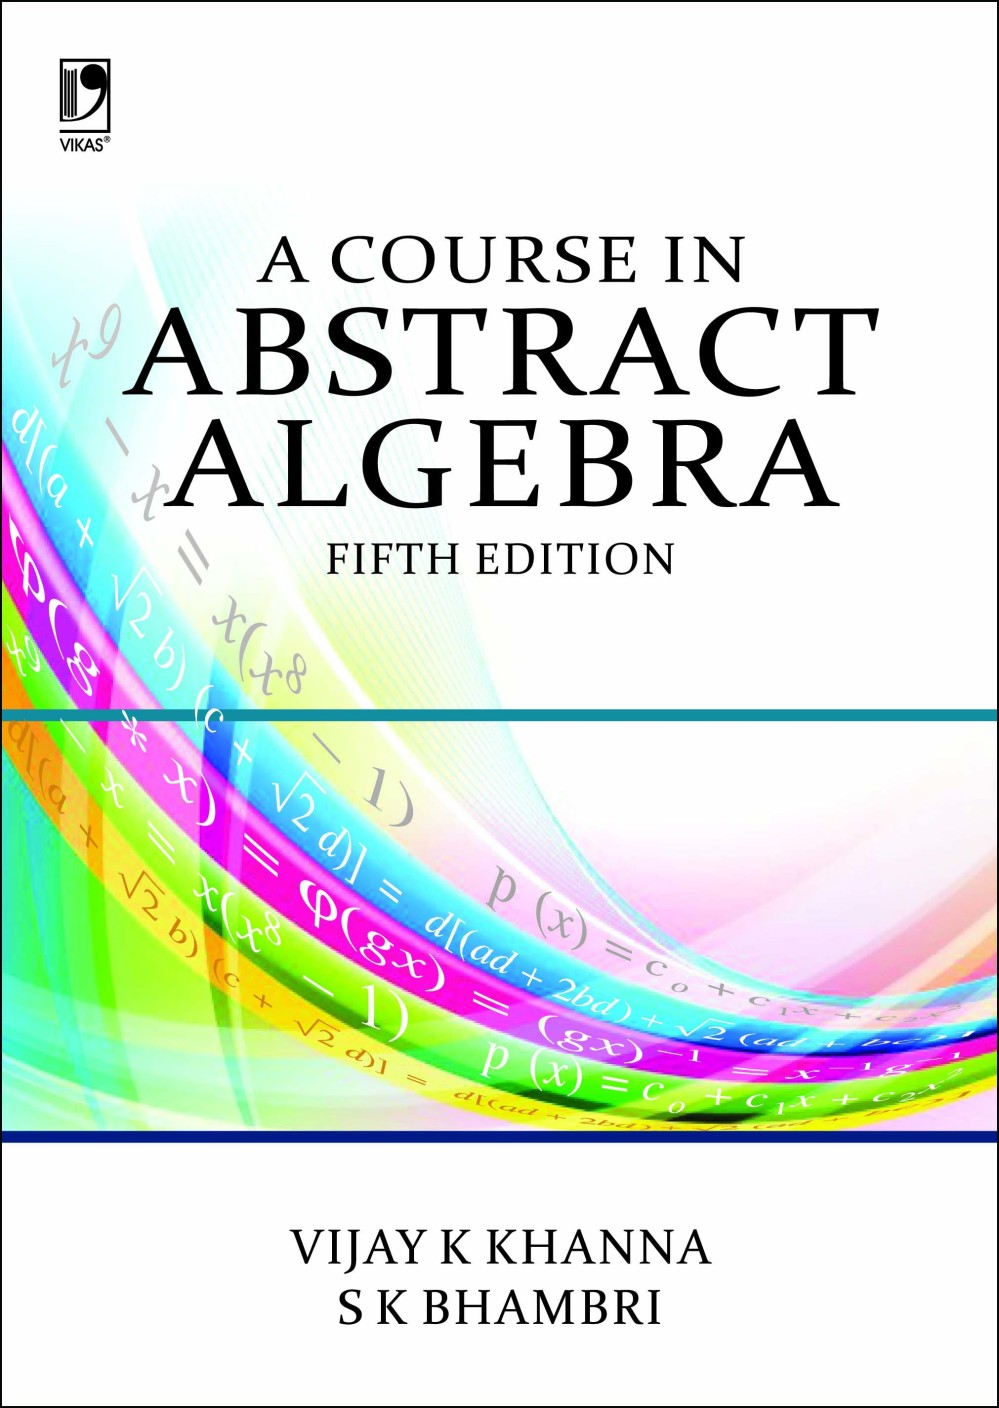 abstract algebra online course